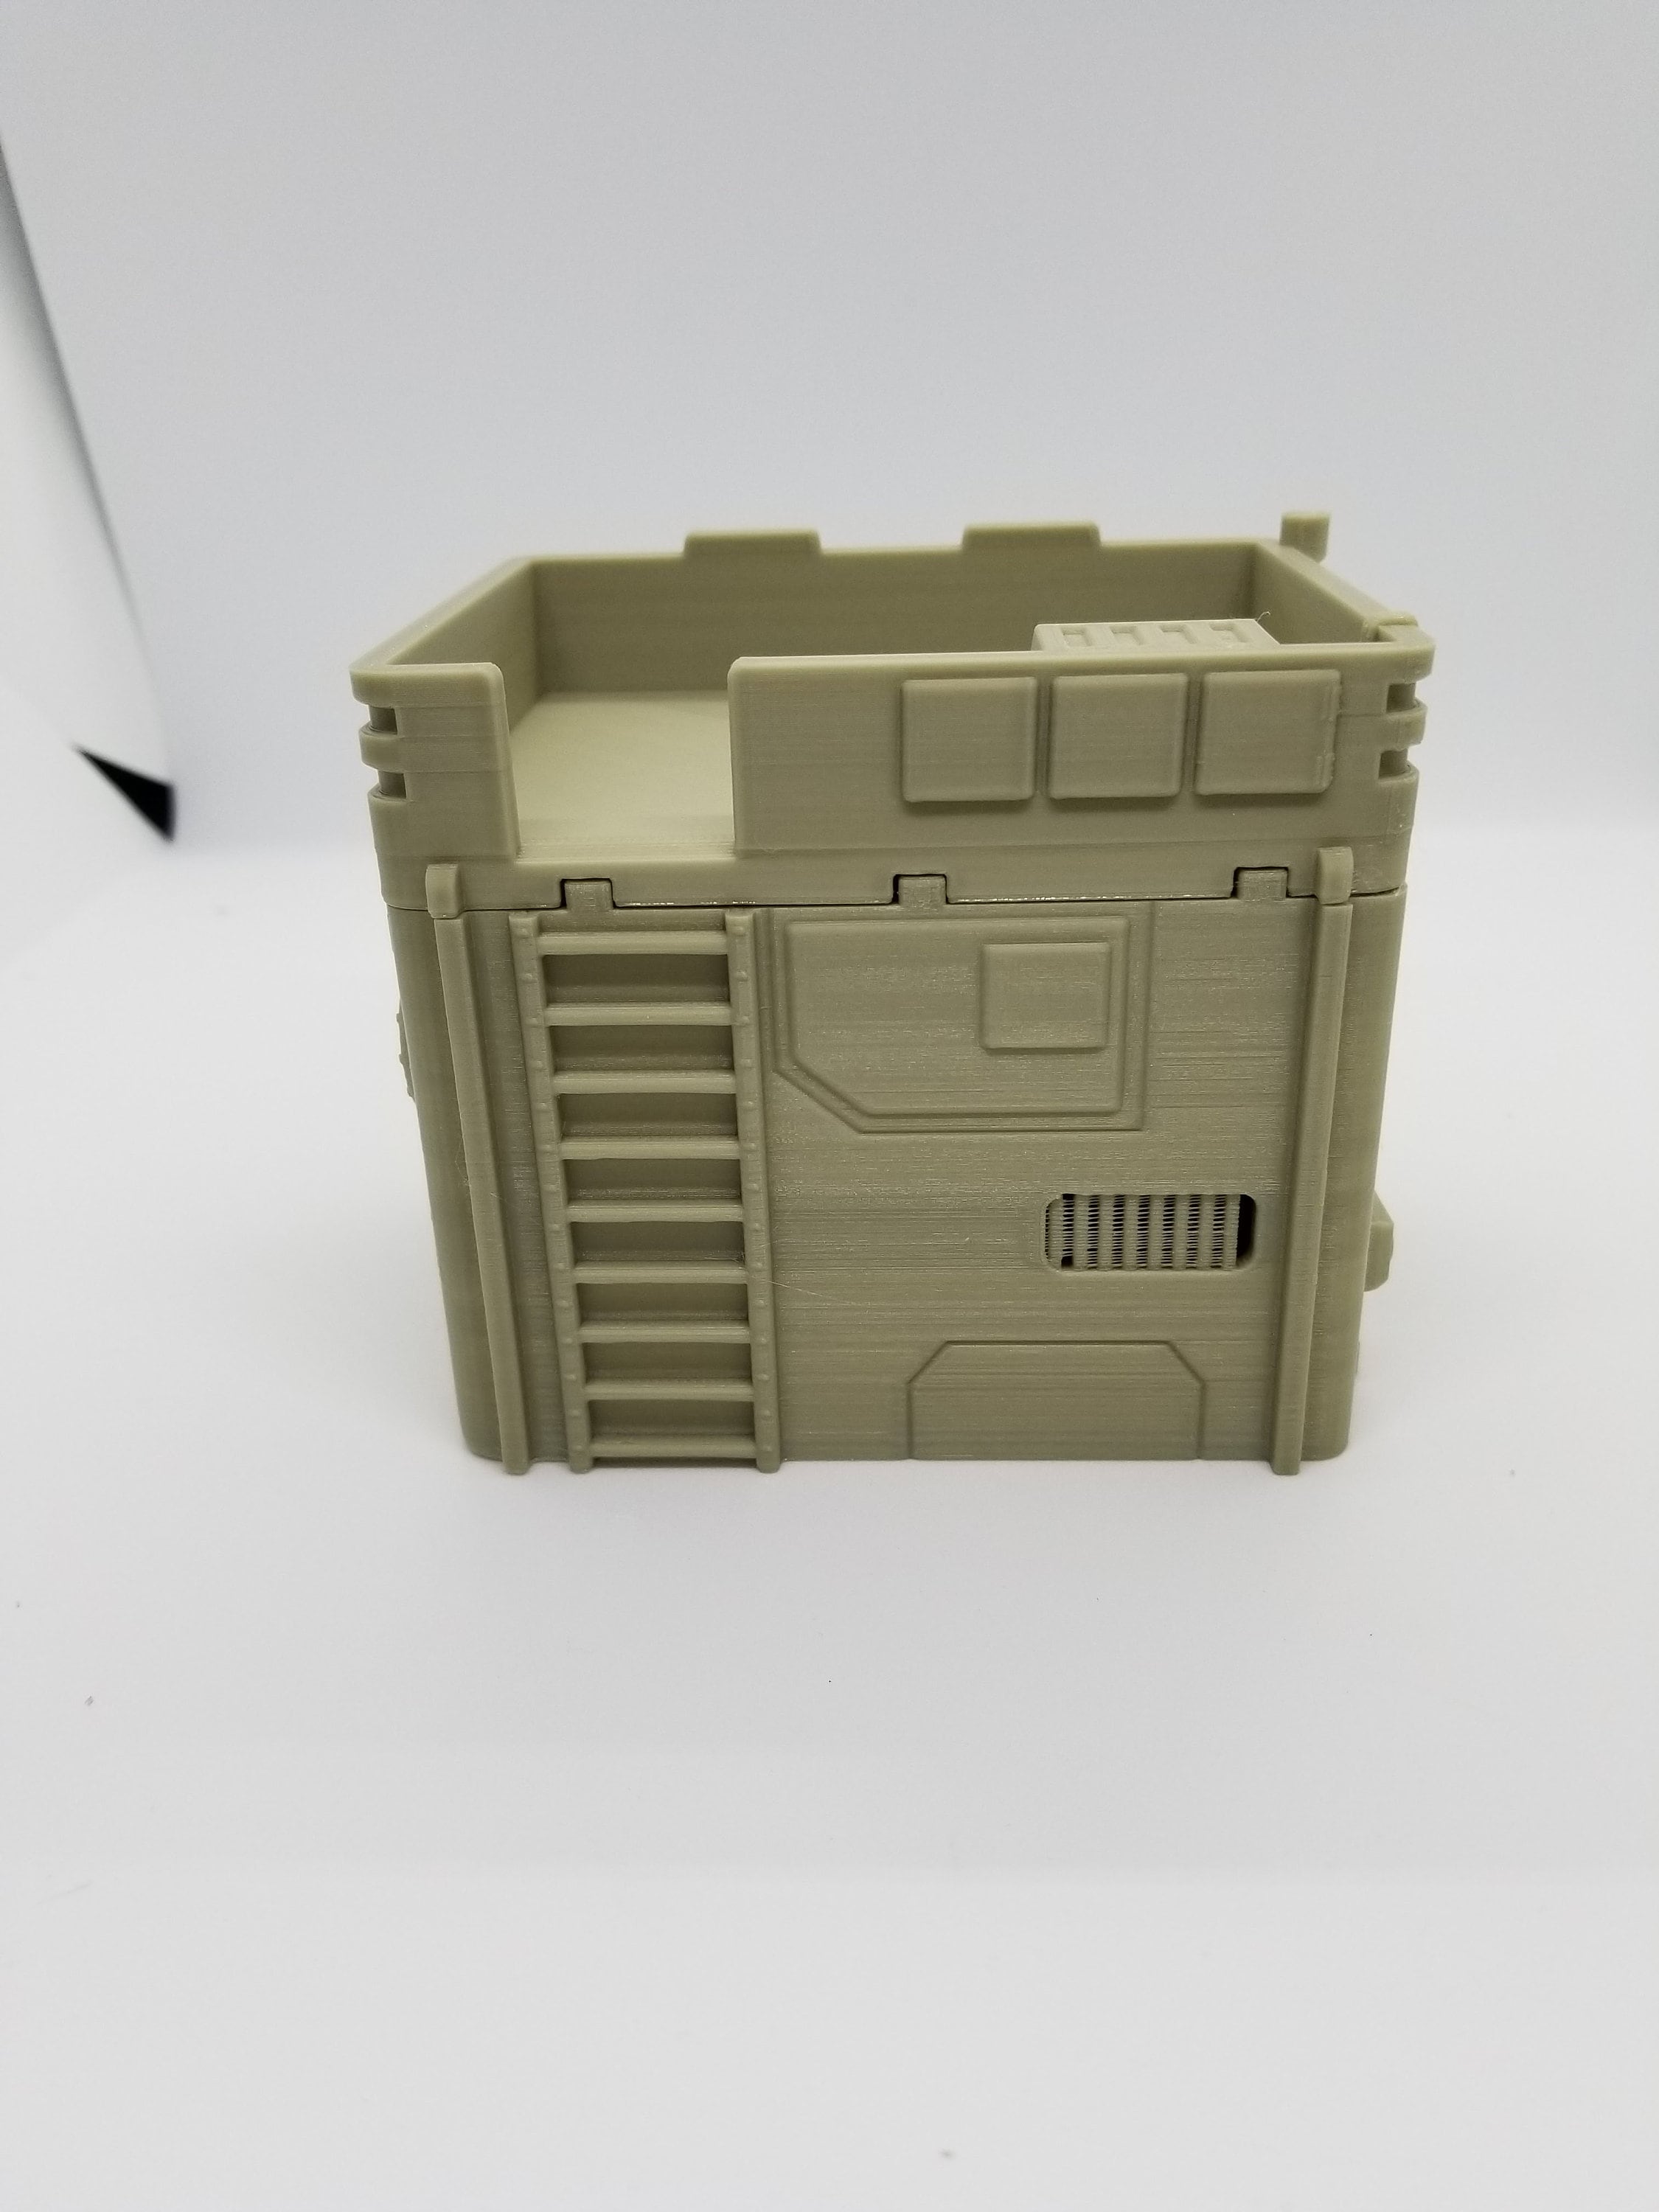 3d Printed Legion Compatible Small City House 1 / Corvus Games Terrain Licensed Printer / Print to Order